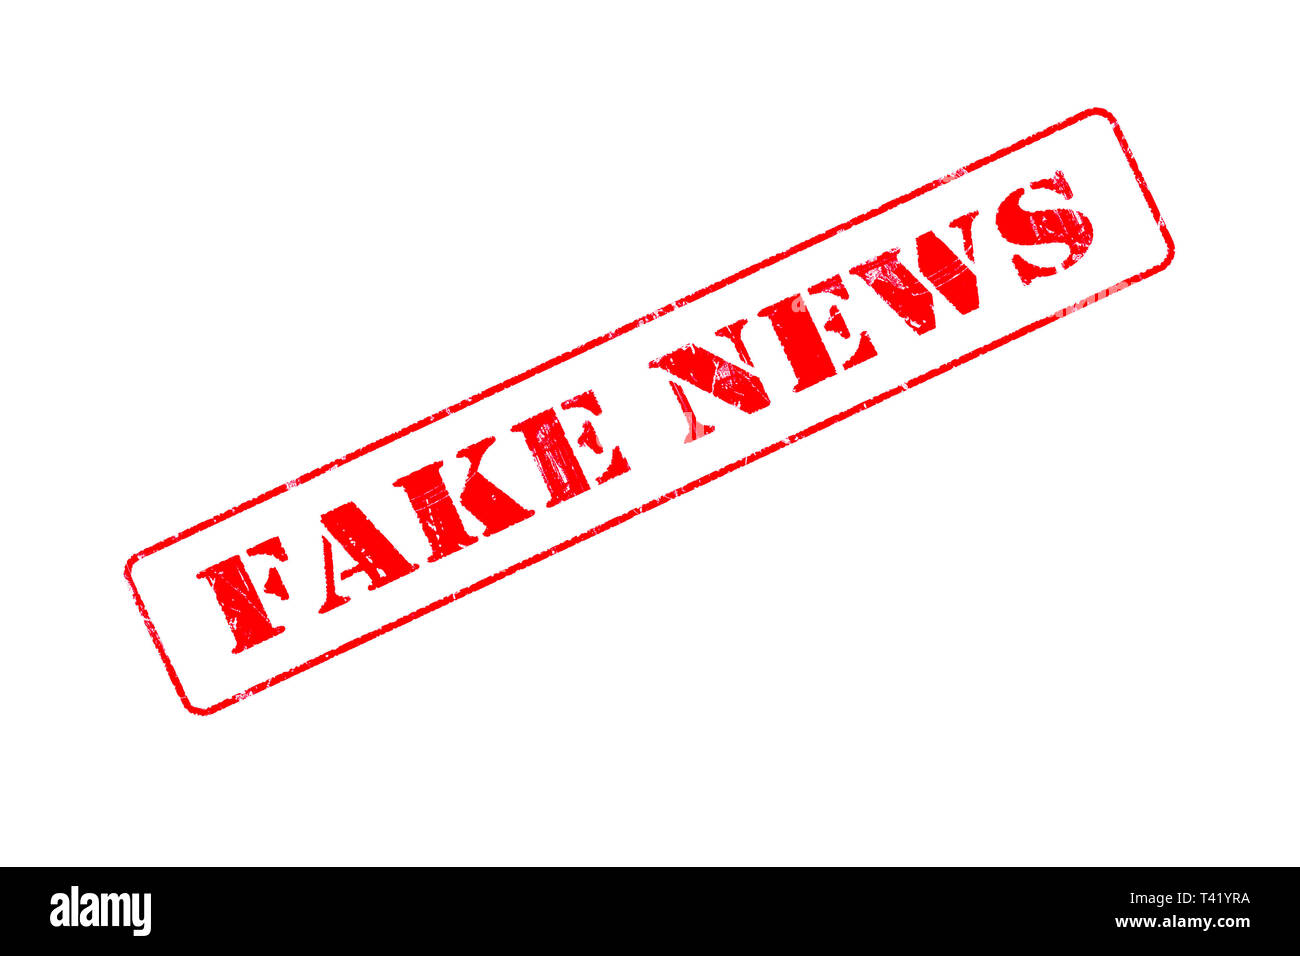 Rubber stamp concept showing a red stamp reading Fake News Stock Photo ...